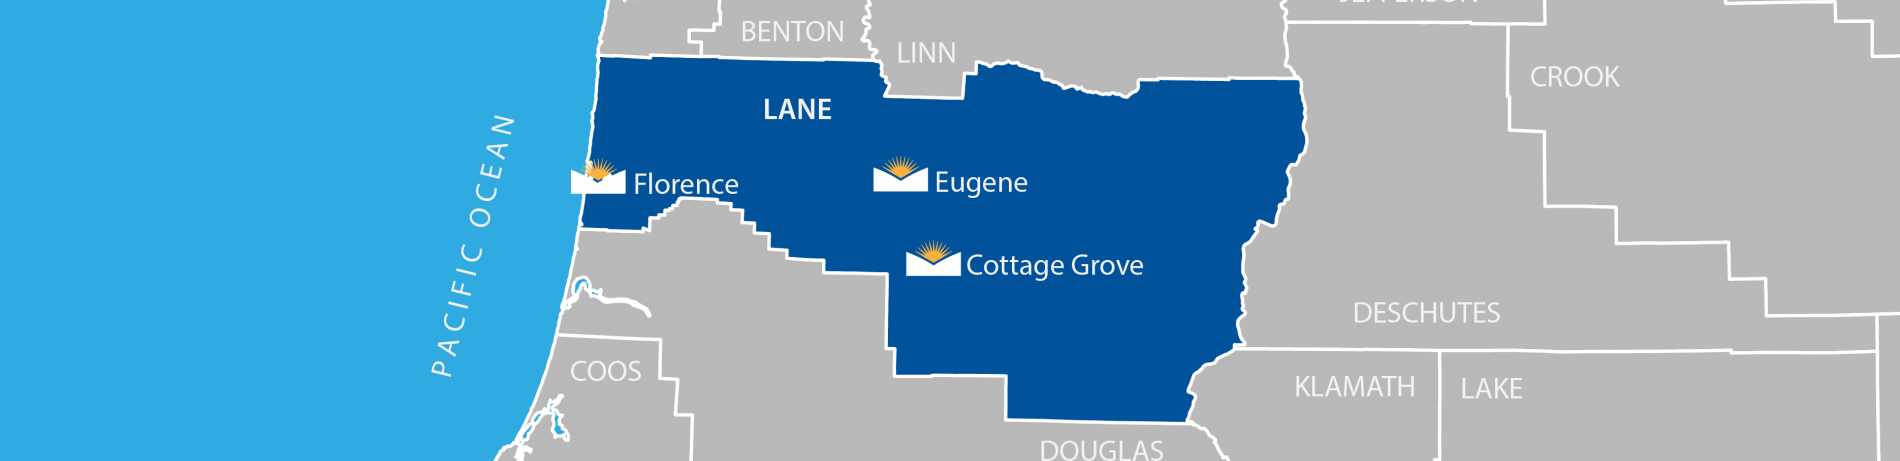 graphic showing LCC's campuses in Lane County